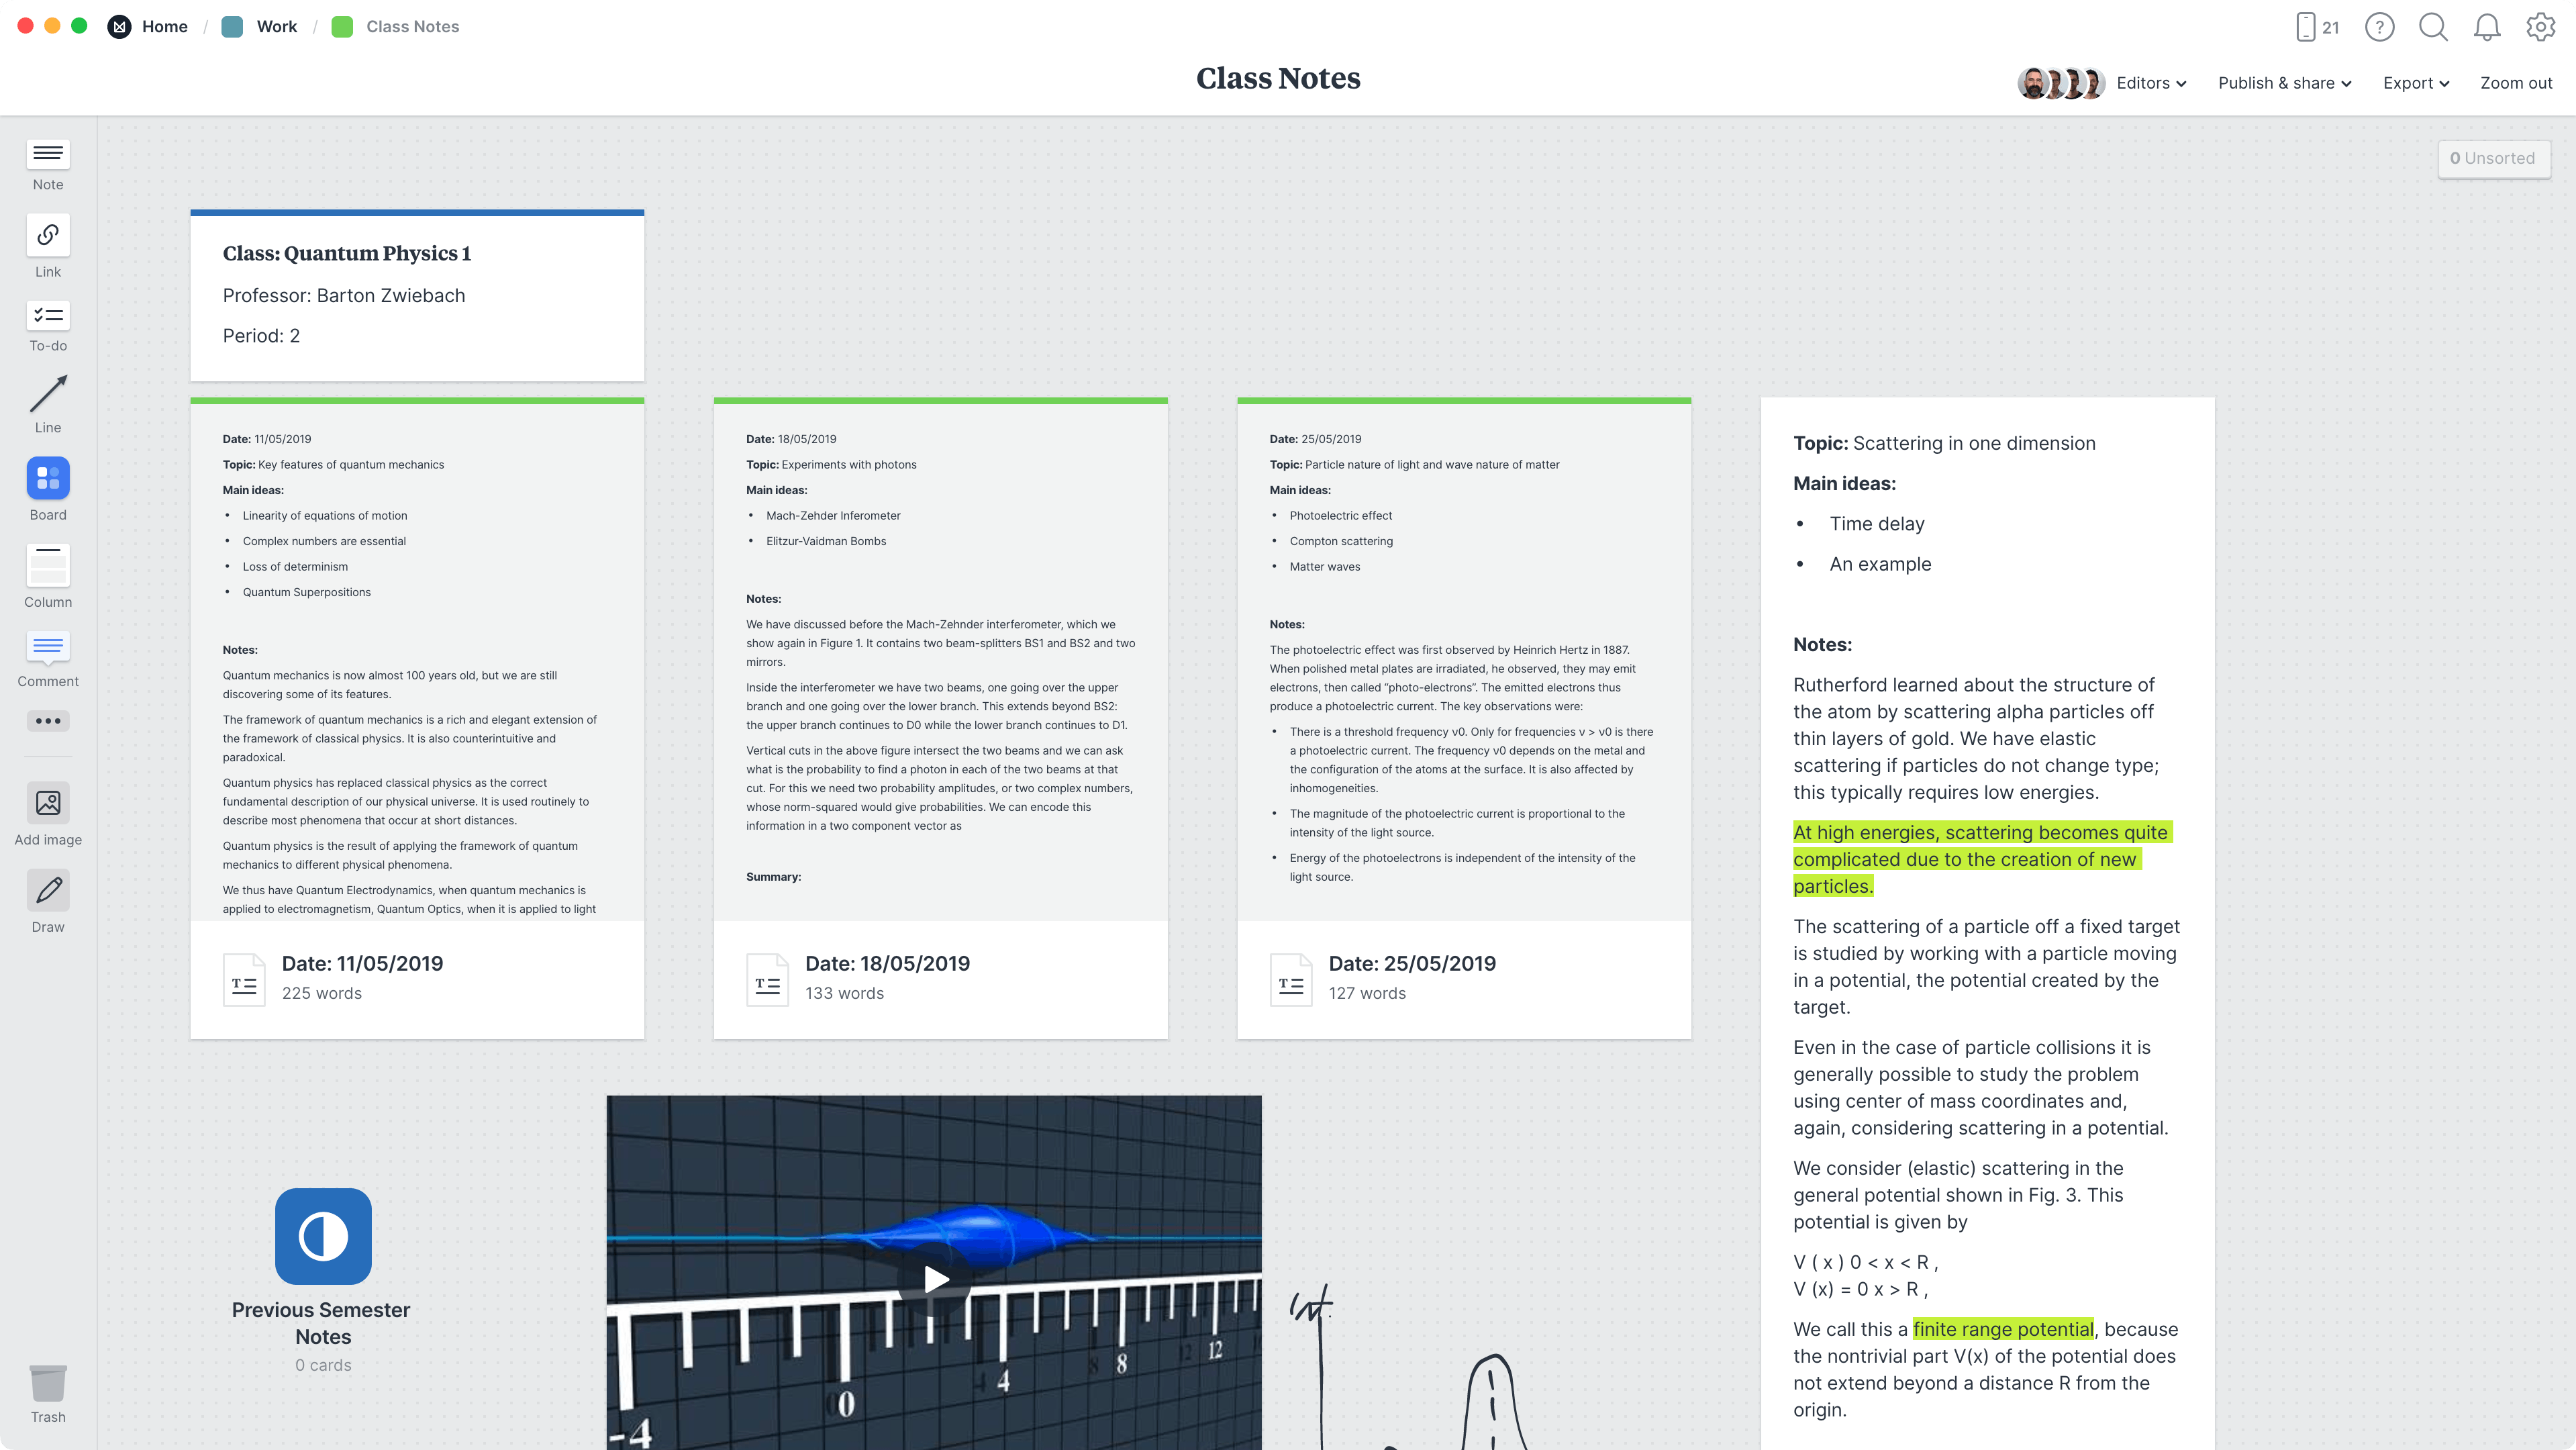 Class Notes Template, within the Milanote app